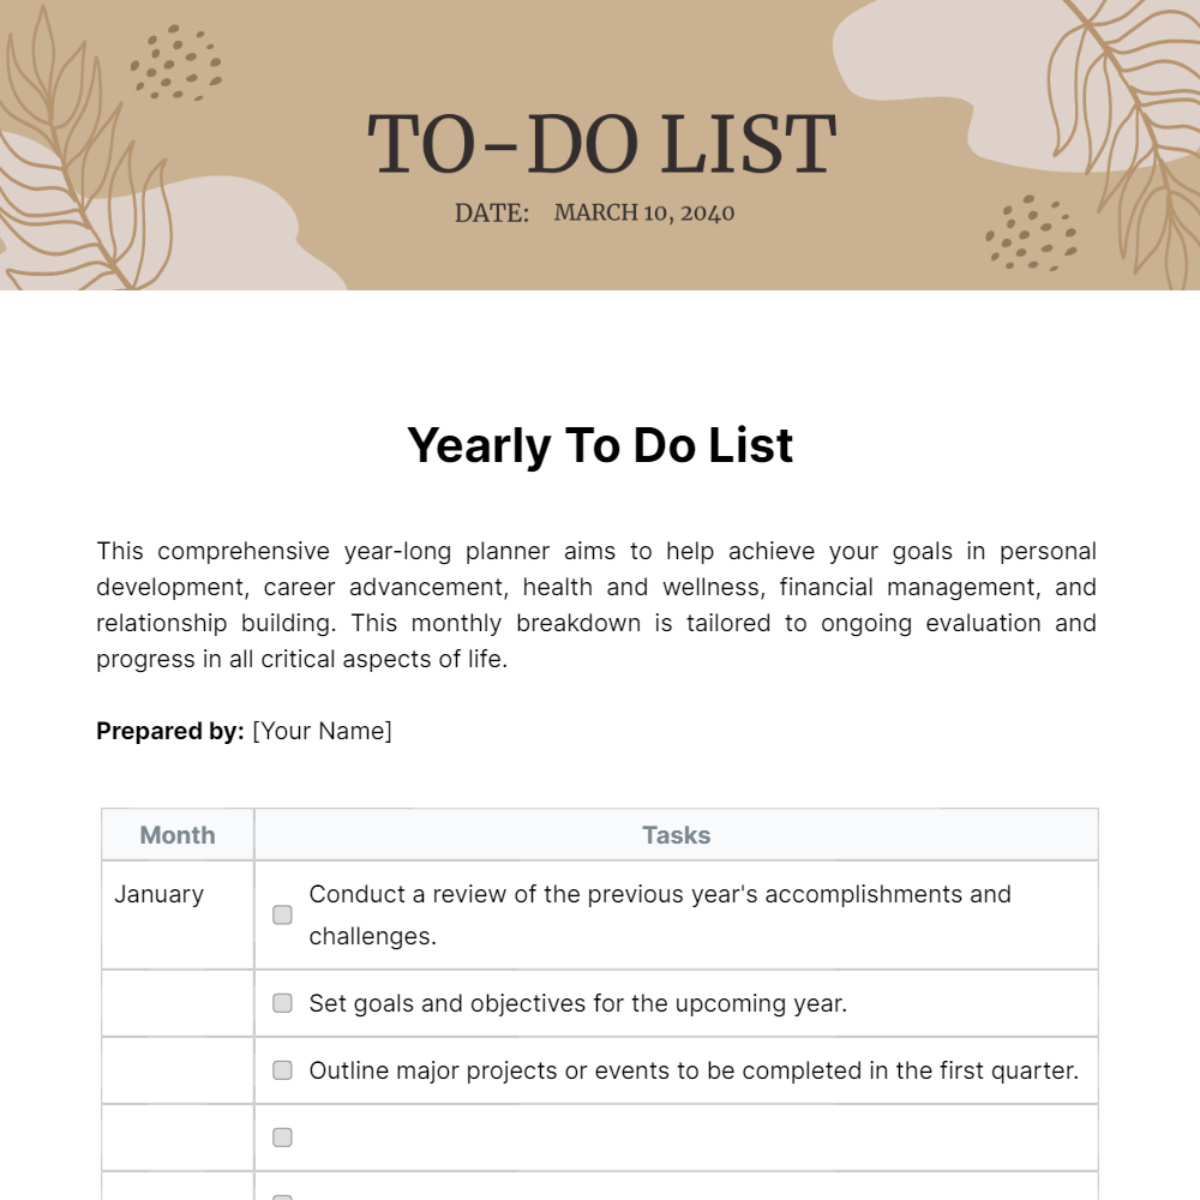 Yearly To Do List Template